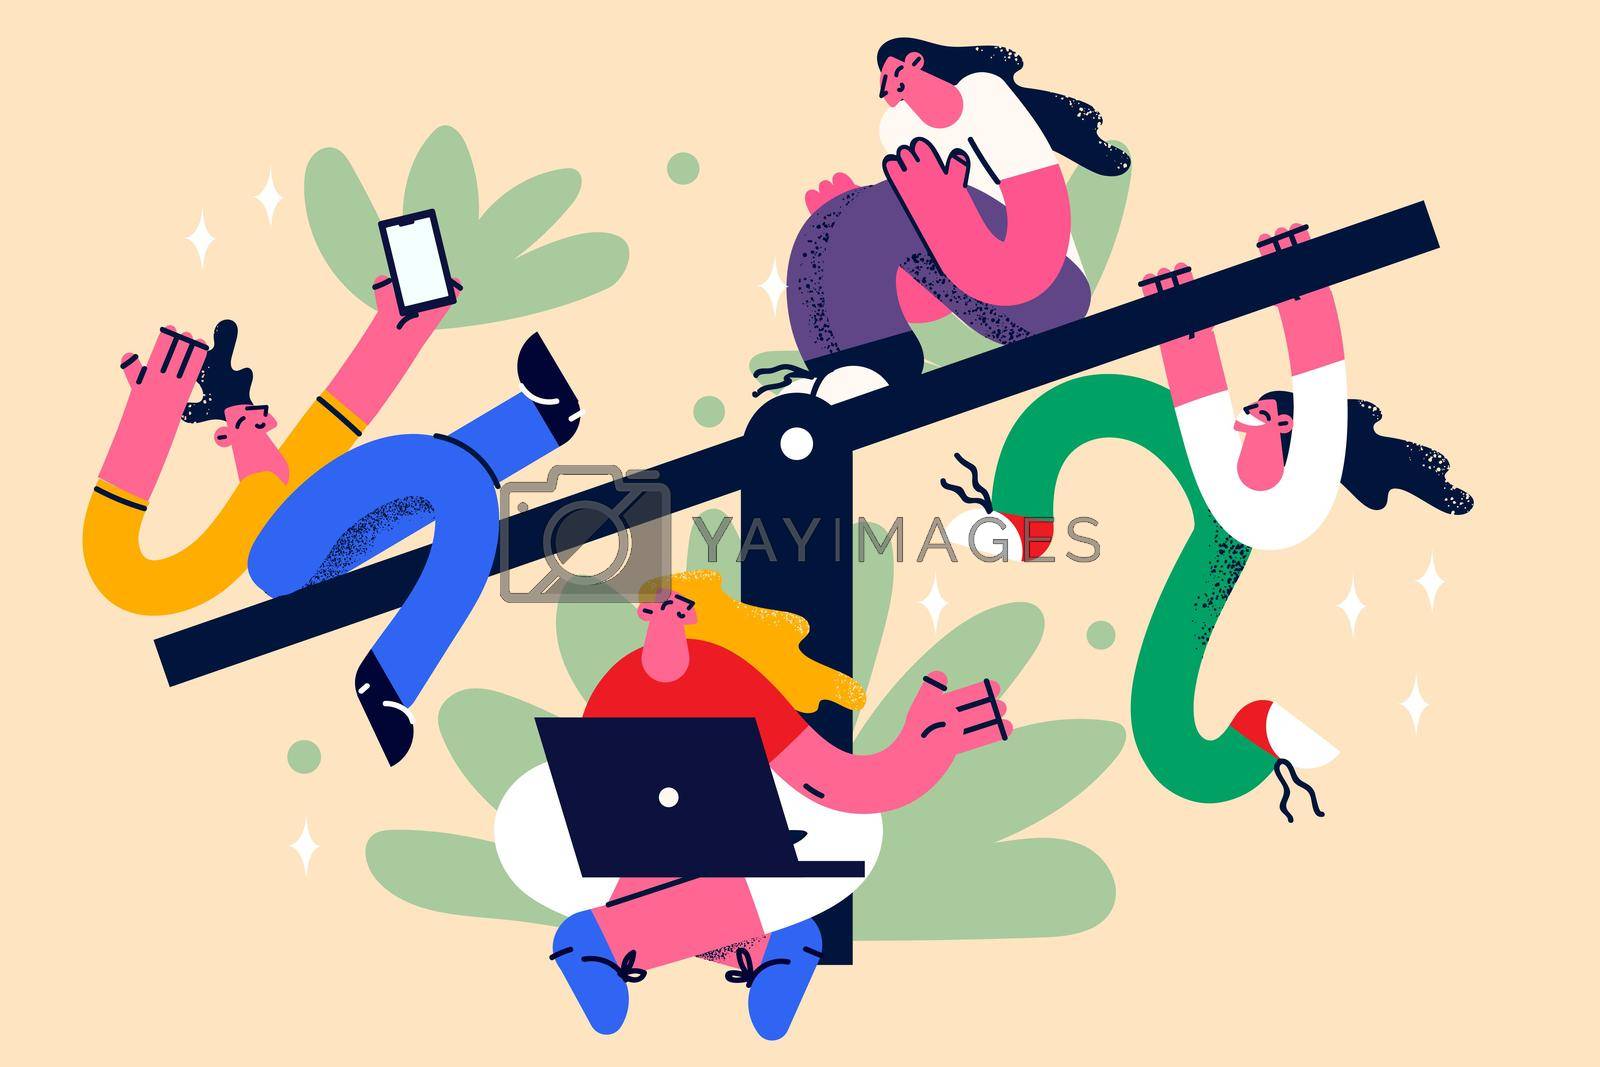 Coworkers, freelancers and Teamwork concept. Group of young people business colleagues cartoon characters sitting working with gadgets as team members vector illustration